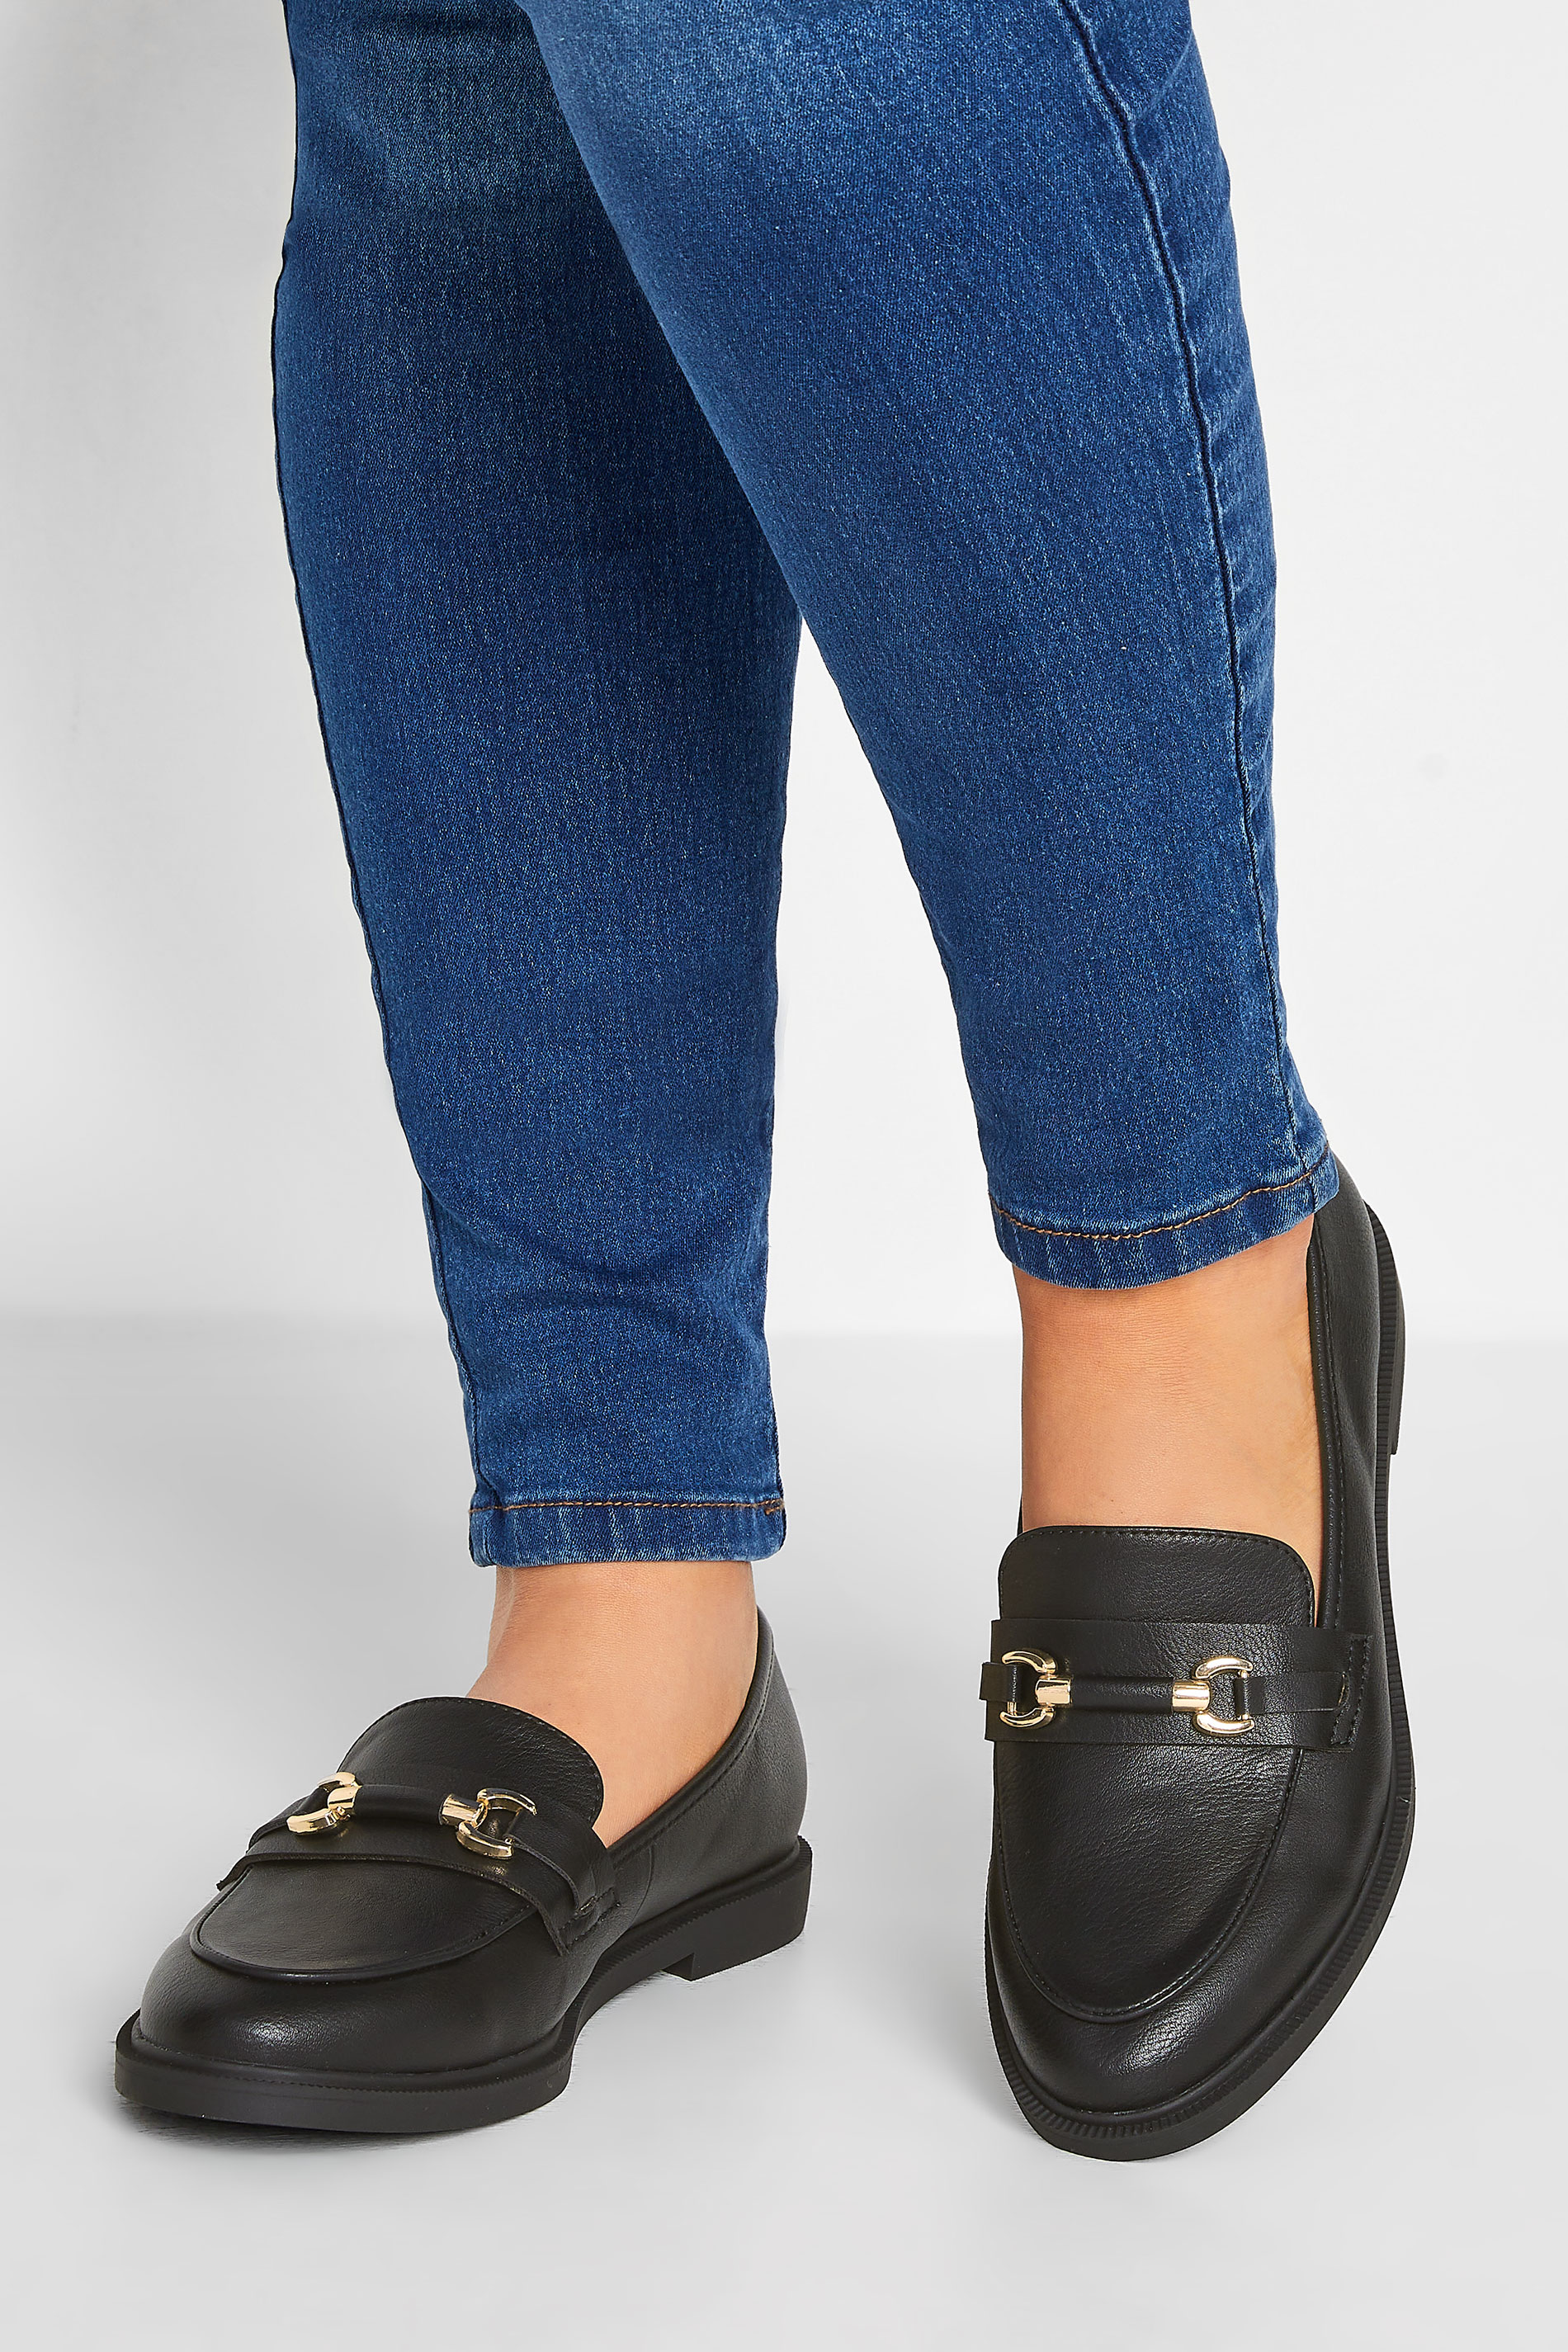 Black PU Chain Detail Loafer In Wide E Fit & Extra Wide EEE Fit | Yours Clothing 1